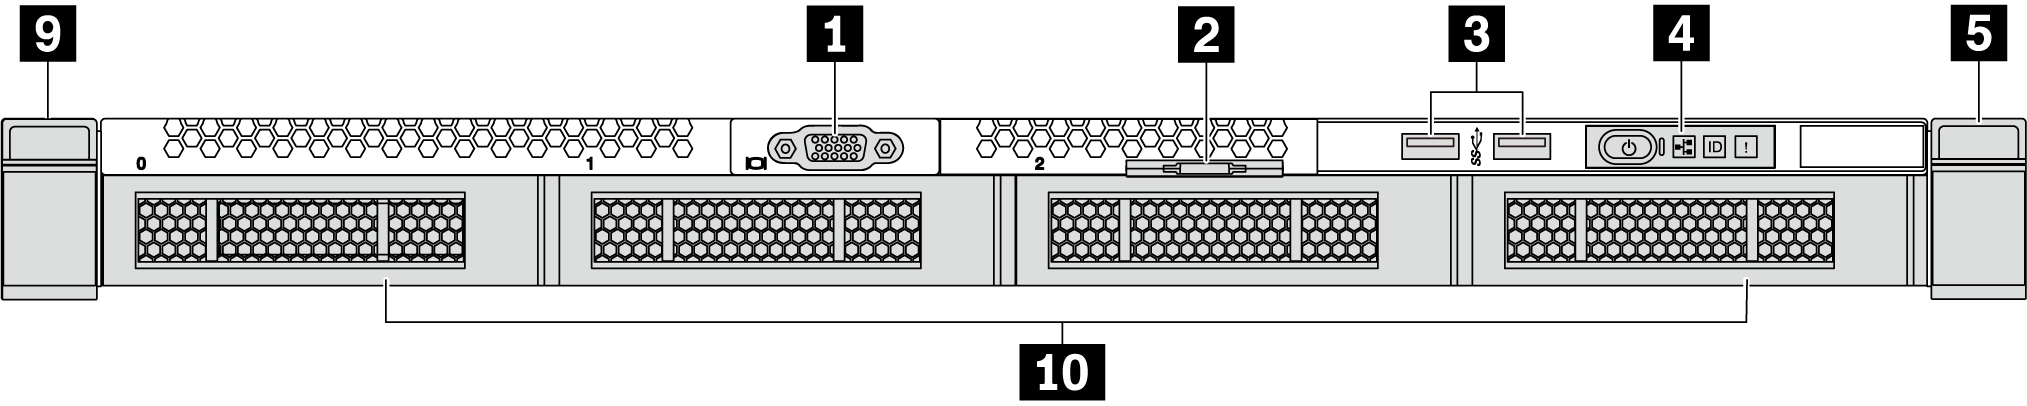 Front view of server model without a backplane (for four 3.5-inch drive bays)